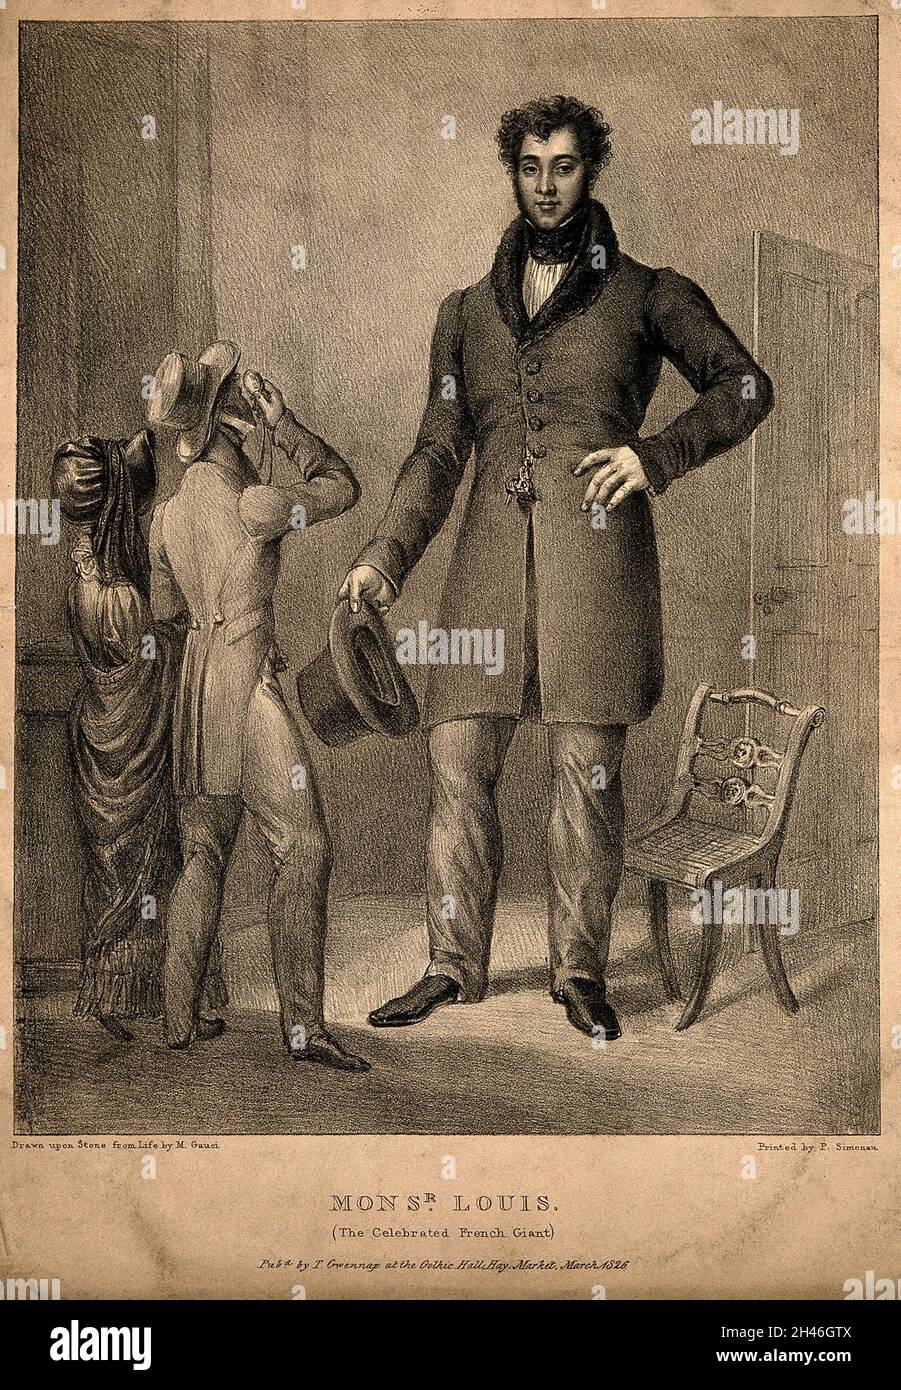 Louis, a giant. Lithograph by M. Gauci, 1826. Stock Photo